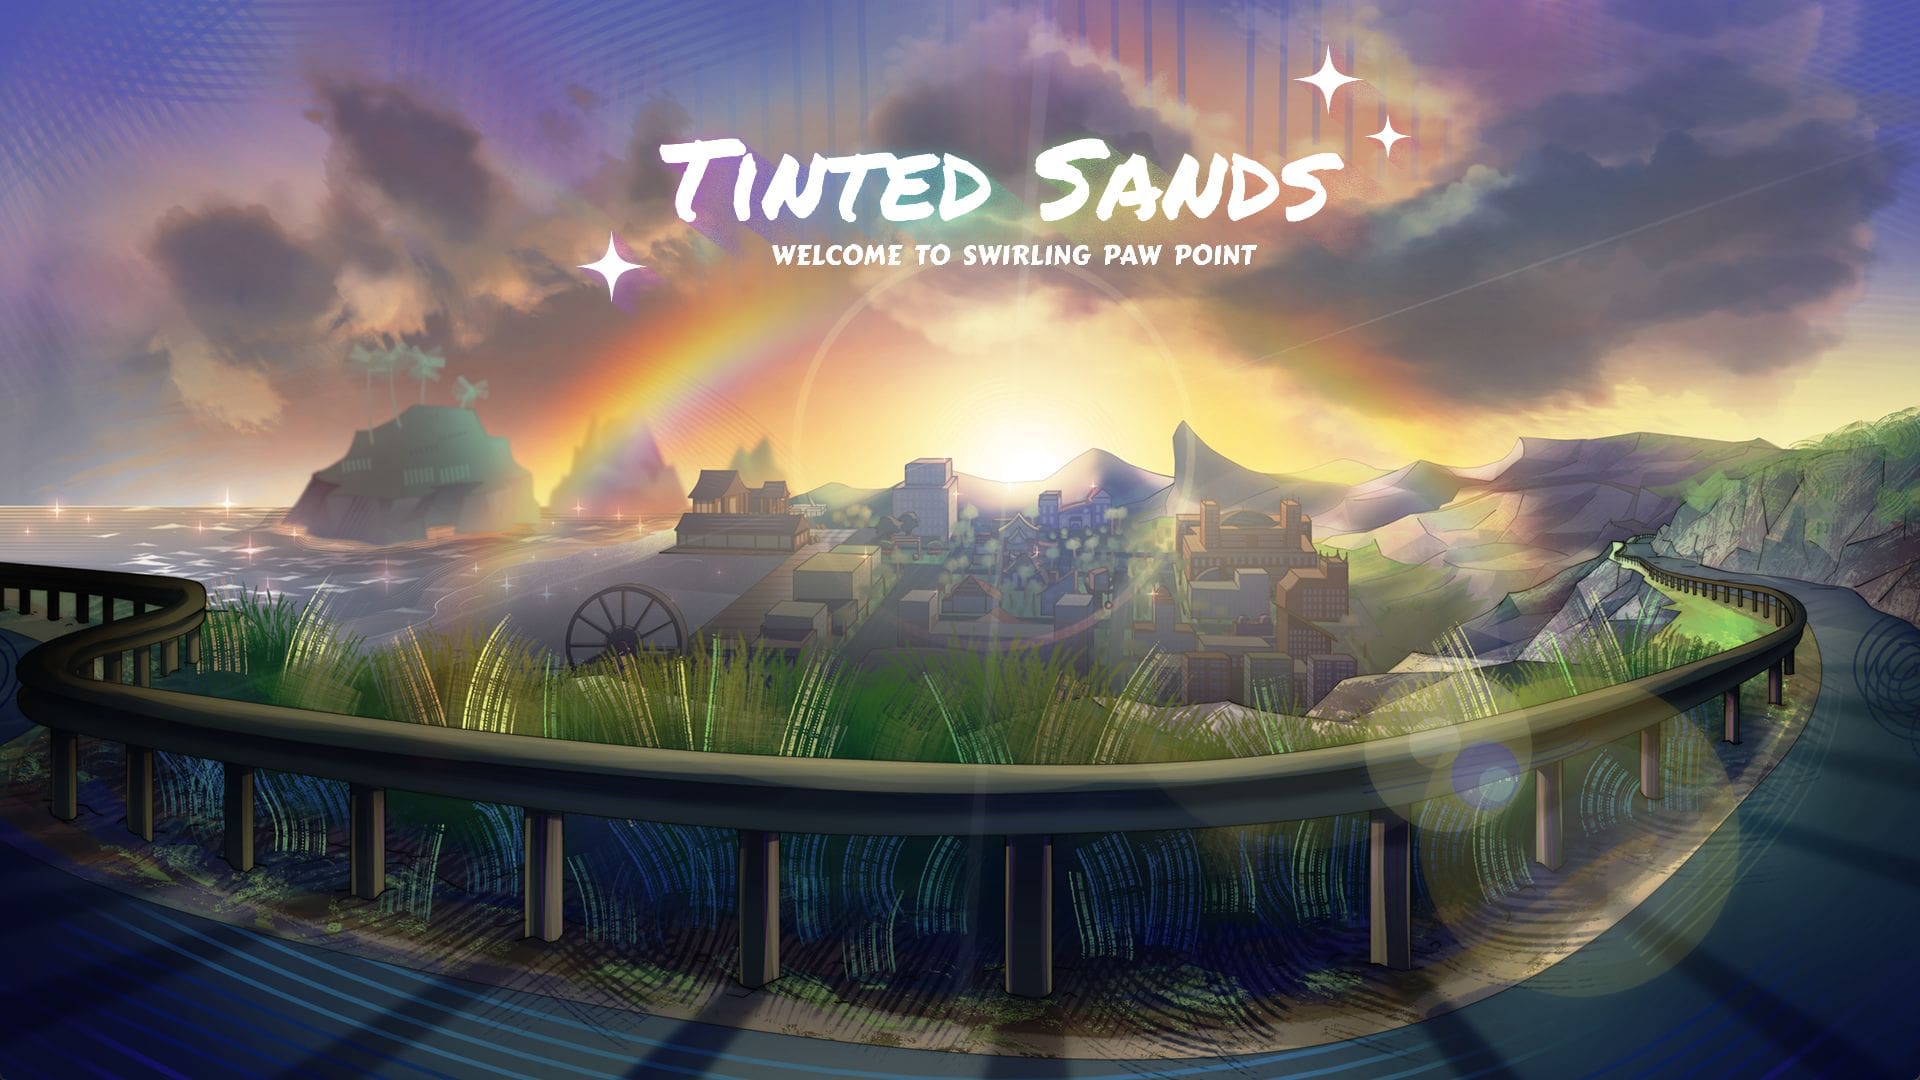 Tinted Sands: Welcome to Swirling Paw Point